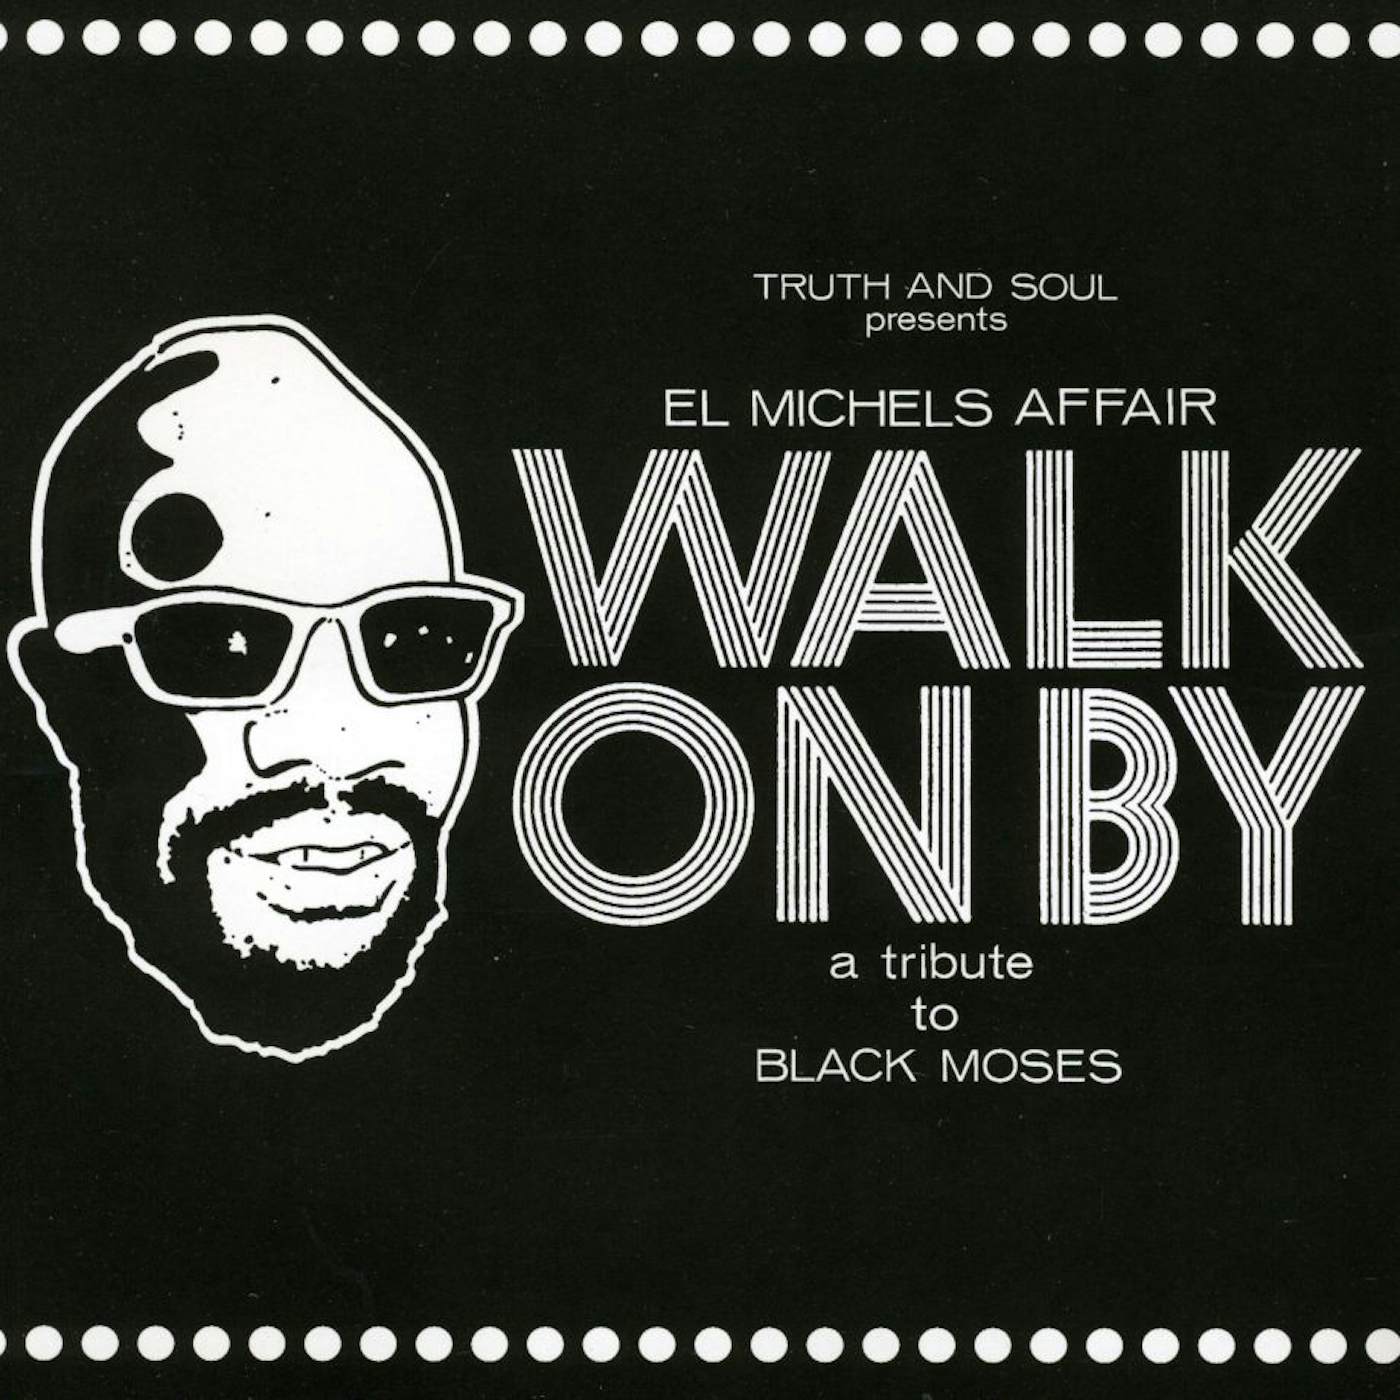 El Michels Affair WALK ON BY (TRIBUTE TO BLACK MOSES) CD